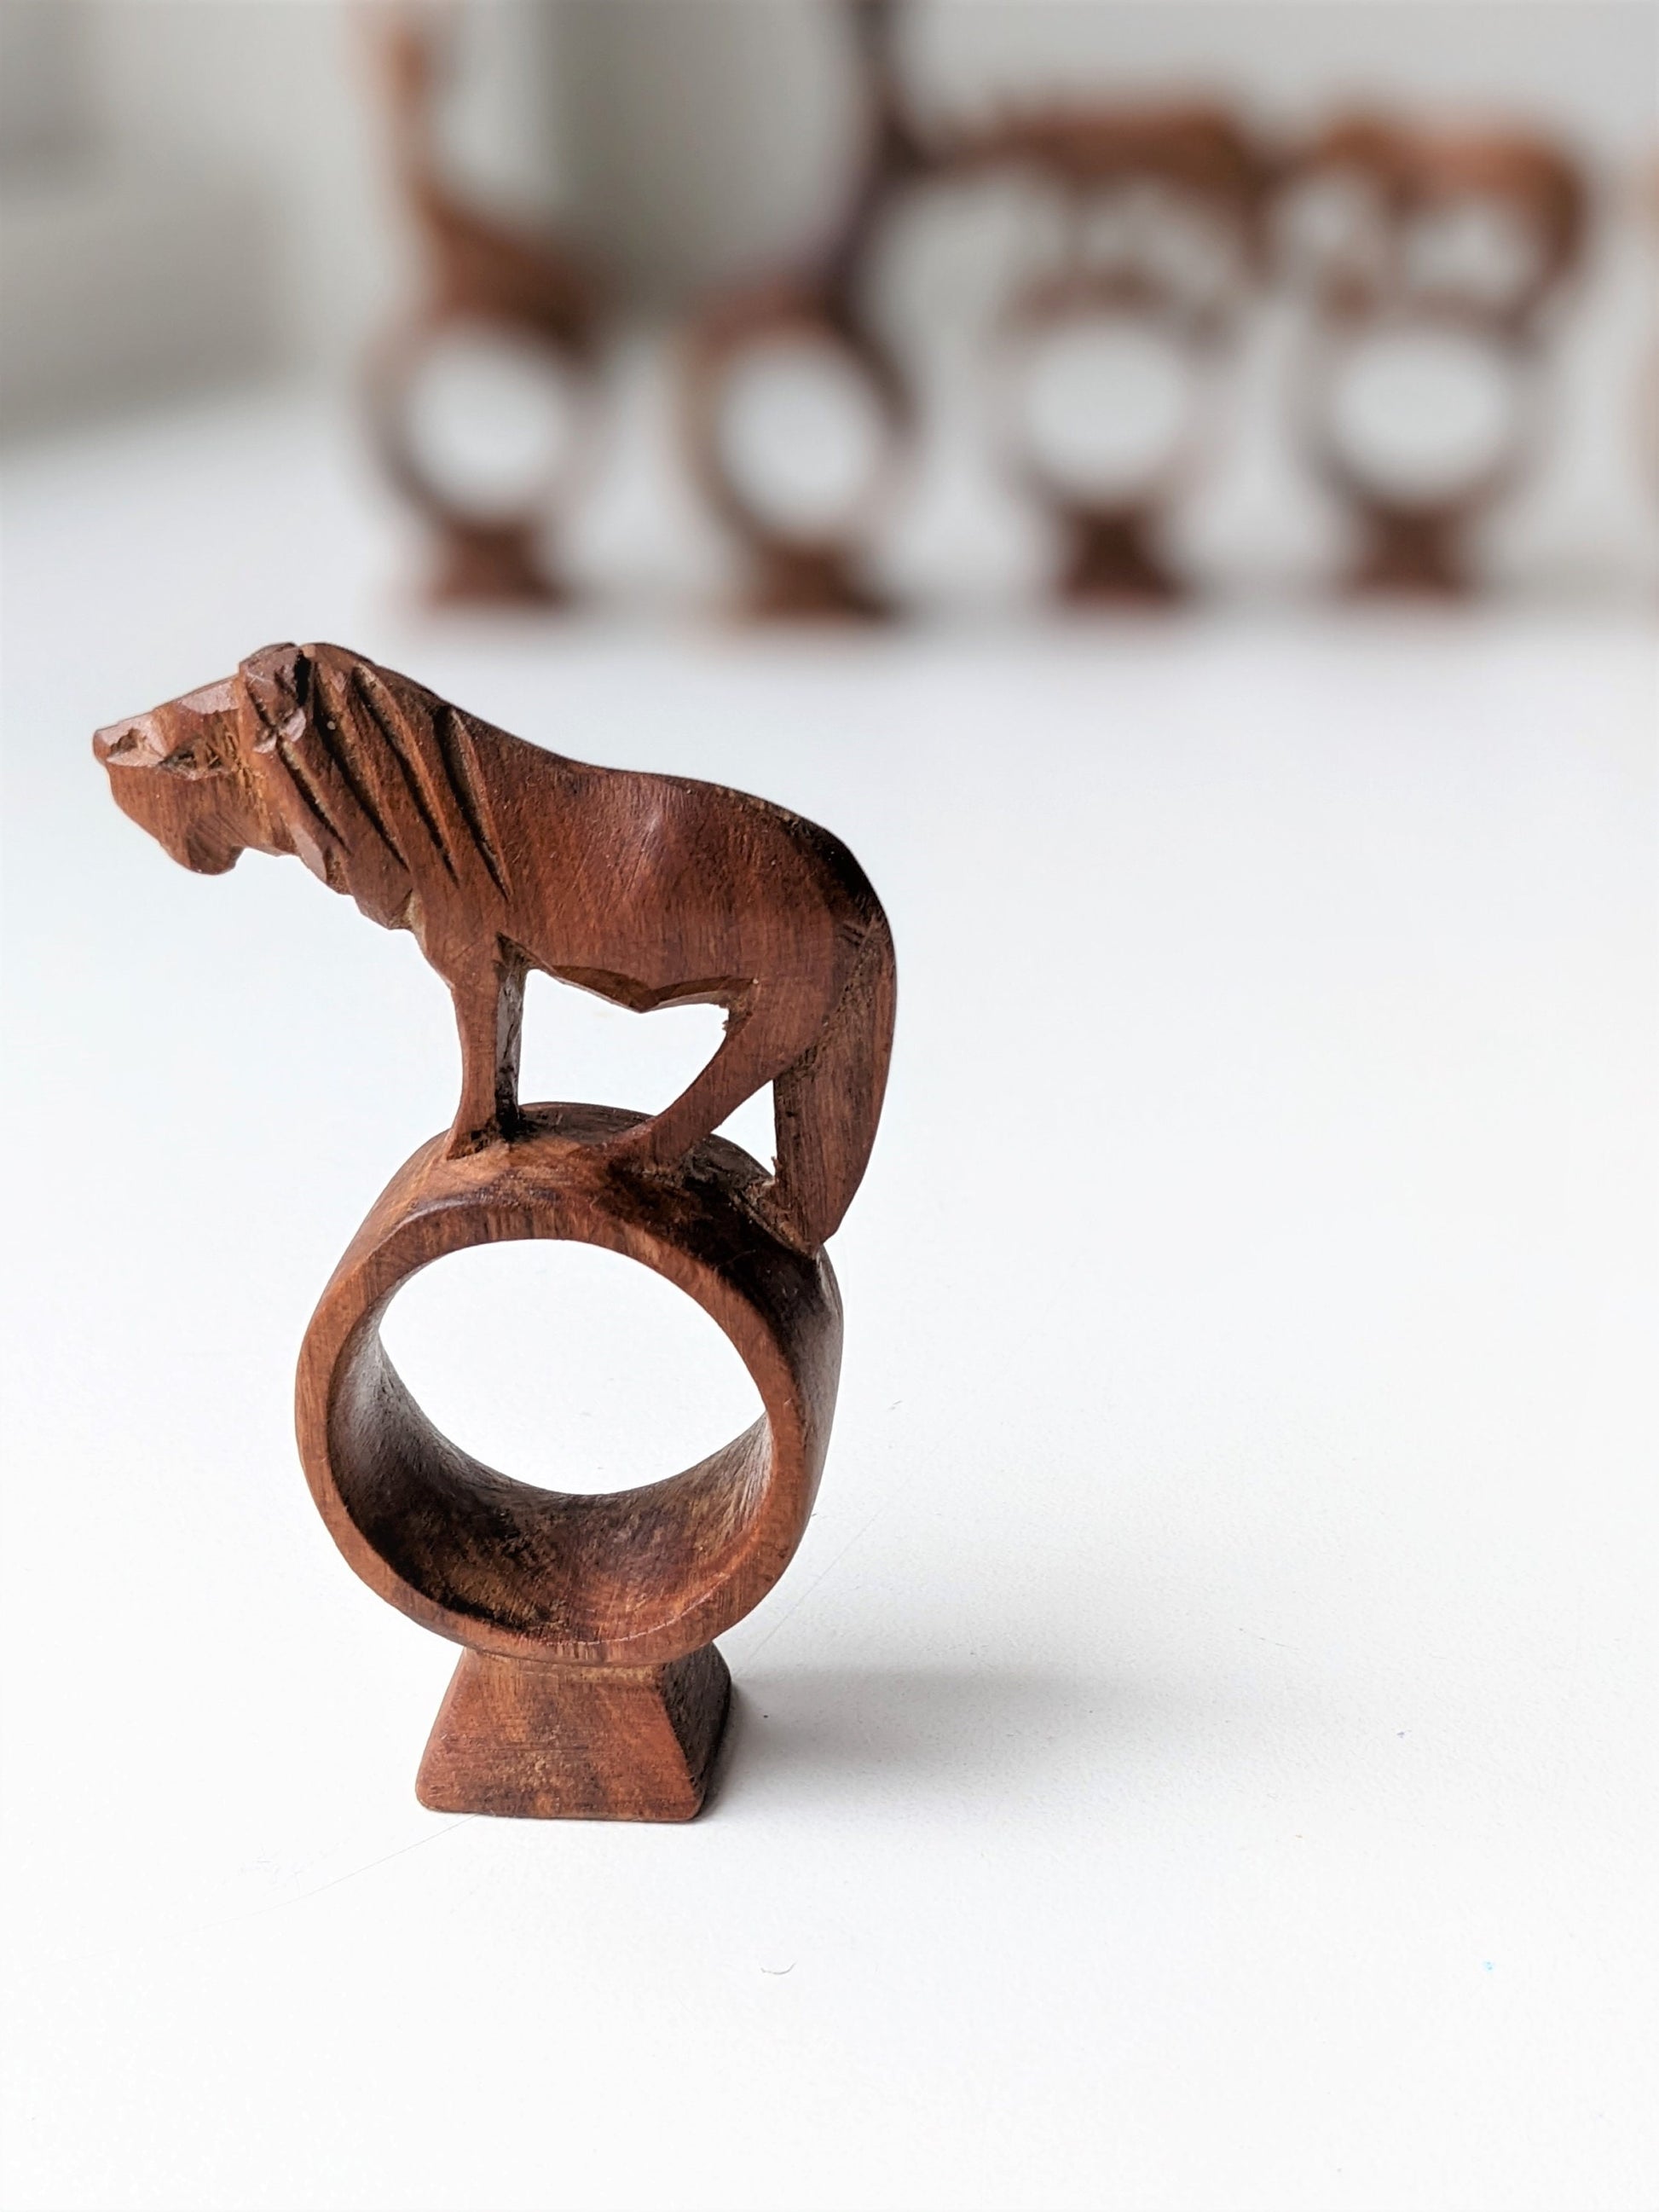 Hand Carved Wooden Ring